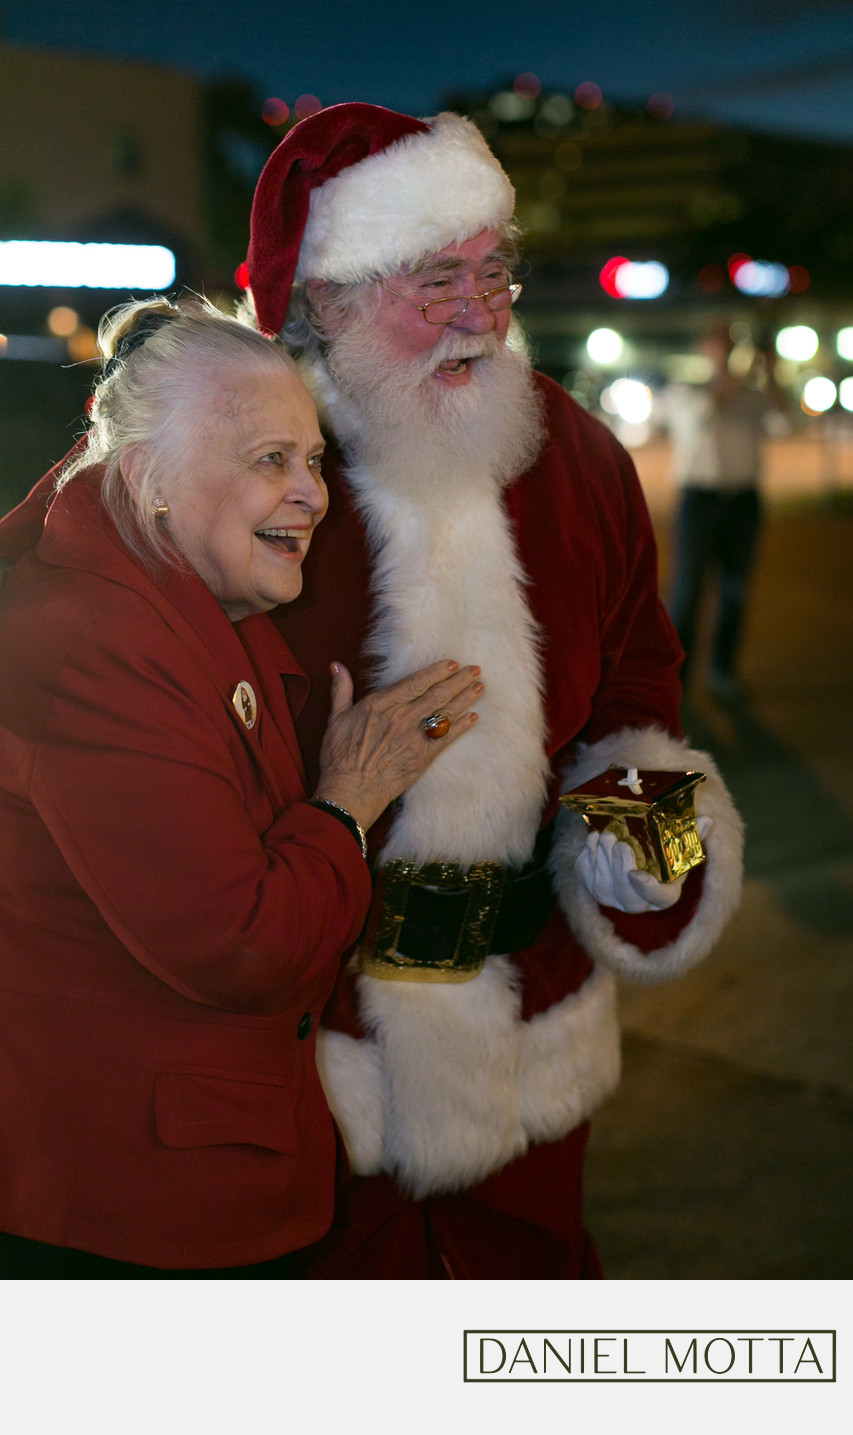 CEO of Ebby Halliday Laughs with Santa Claus